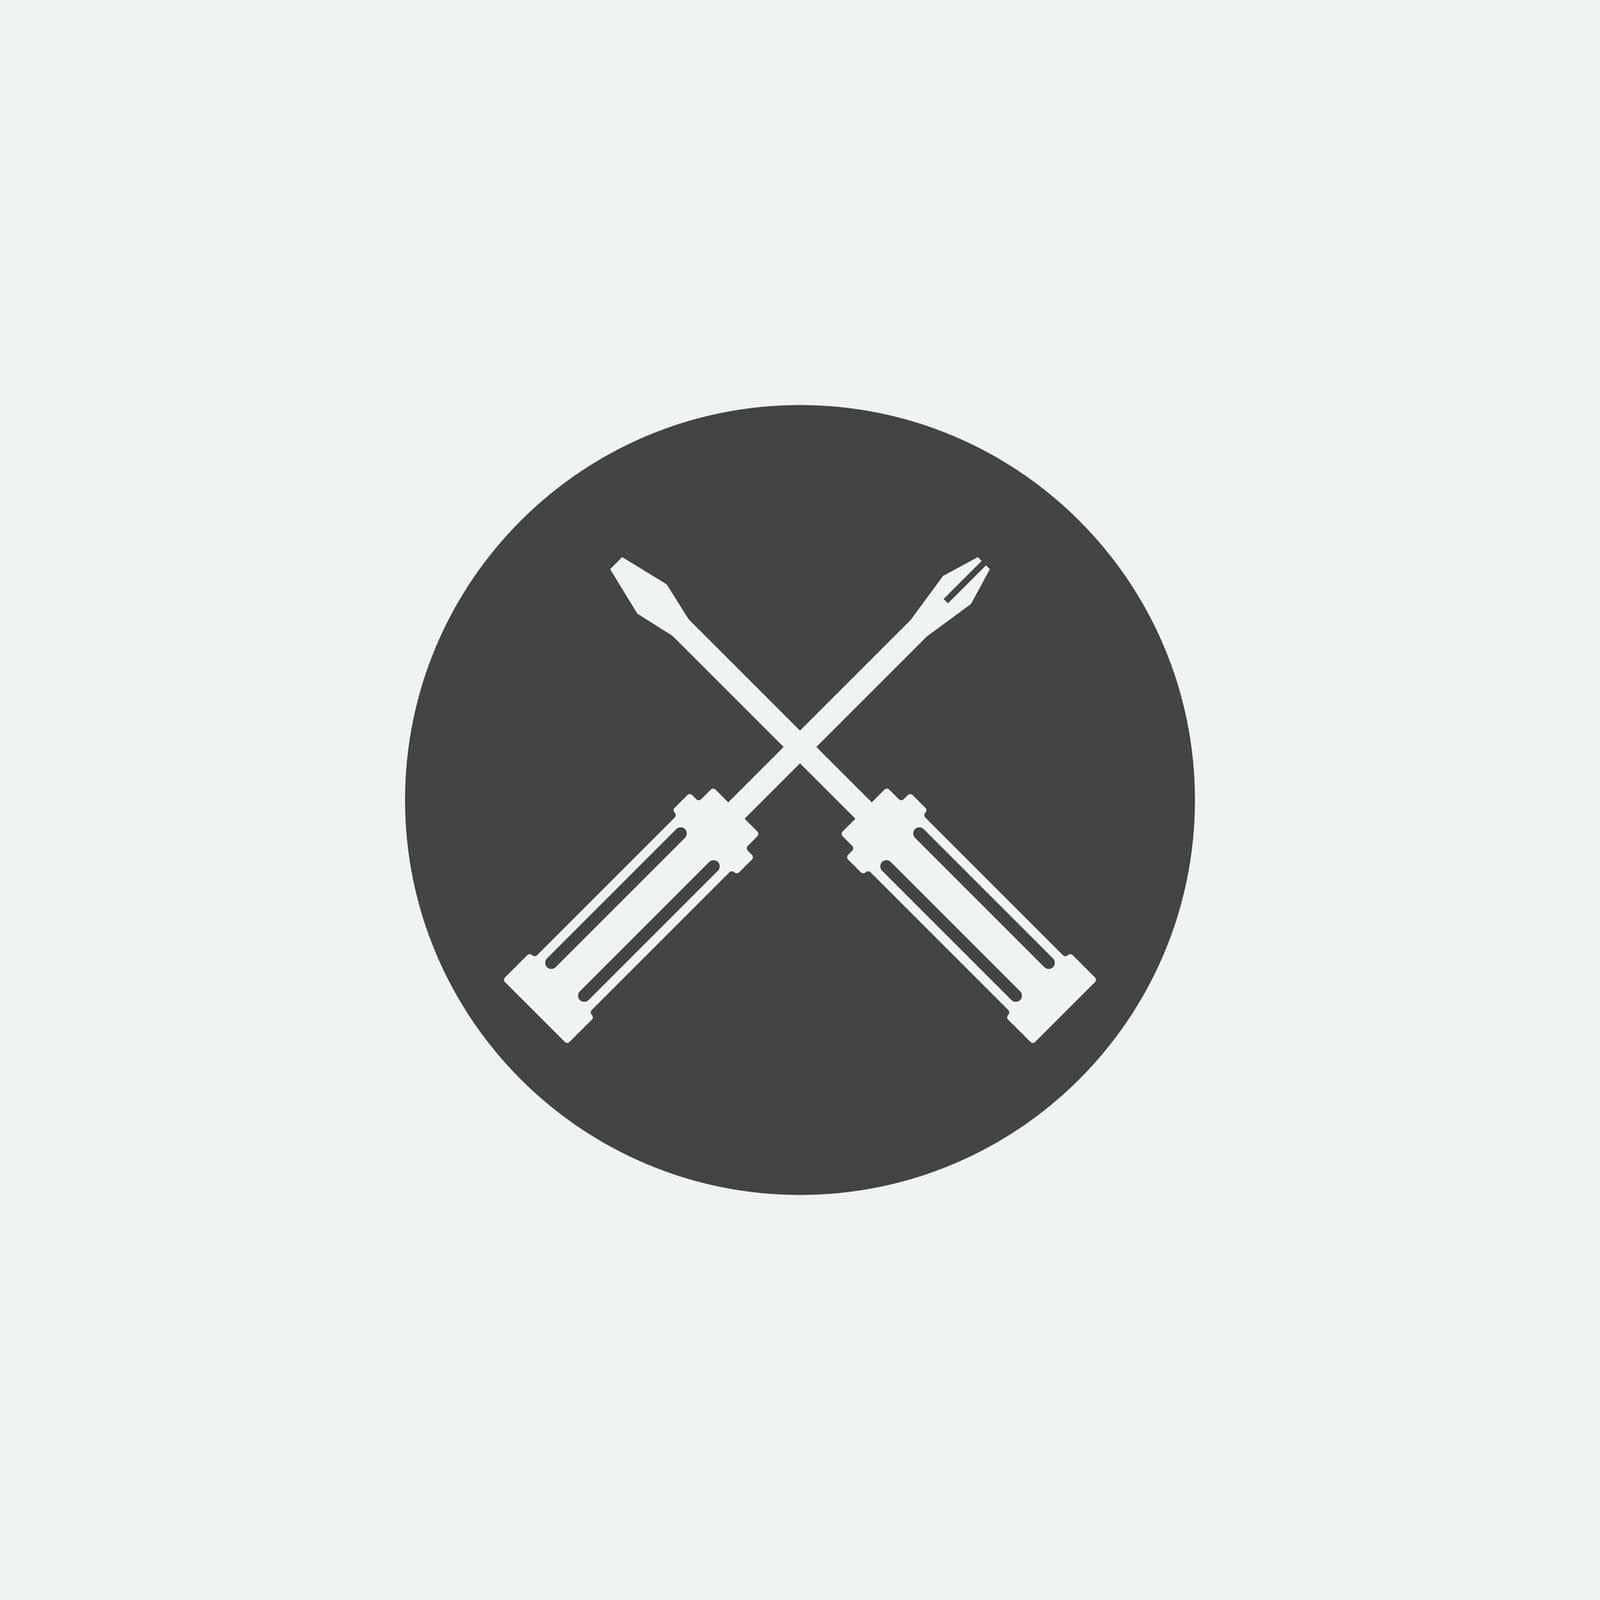 Service Tools vector icon illustration design  by Mrsongrphc